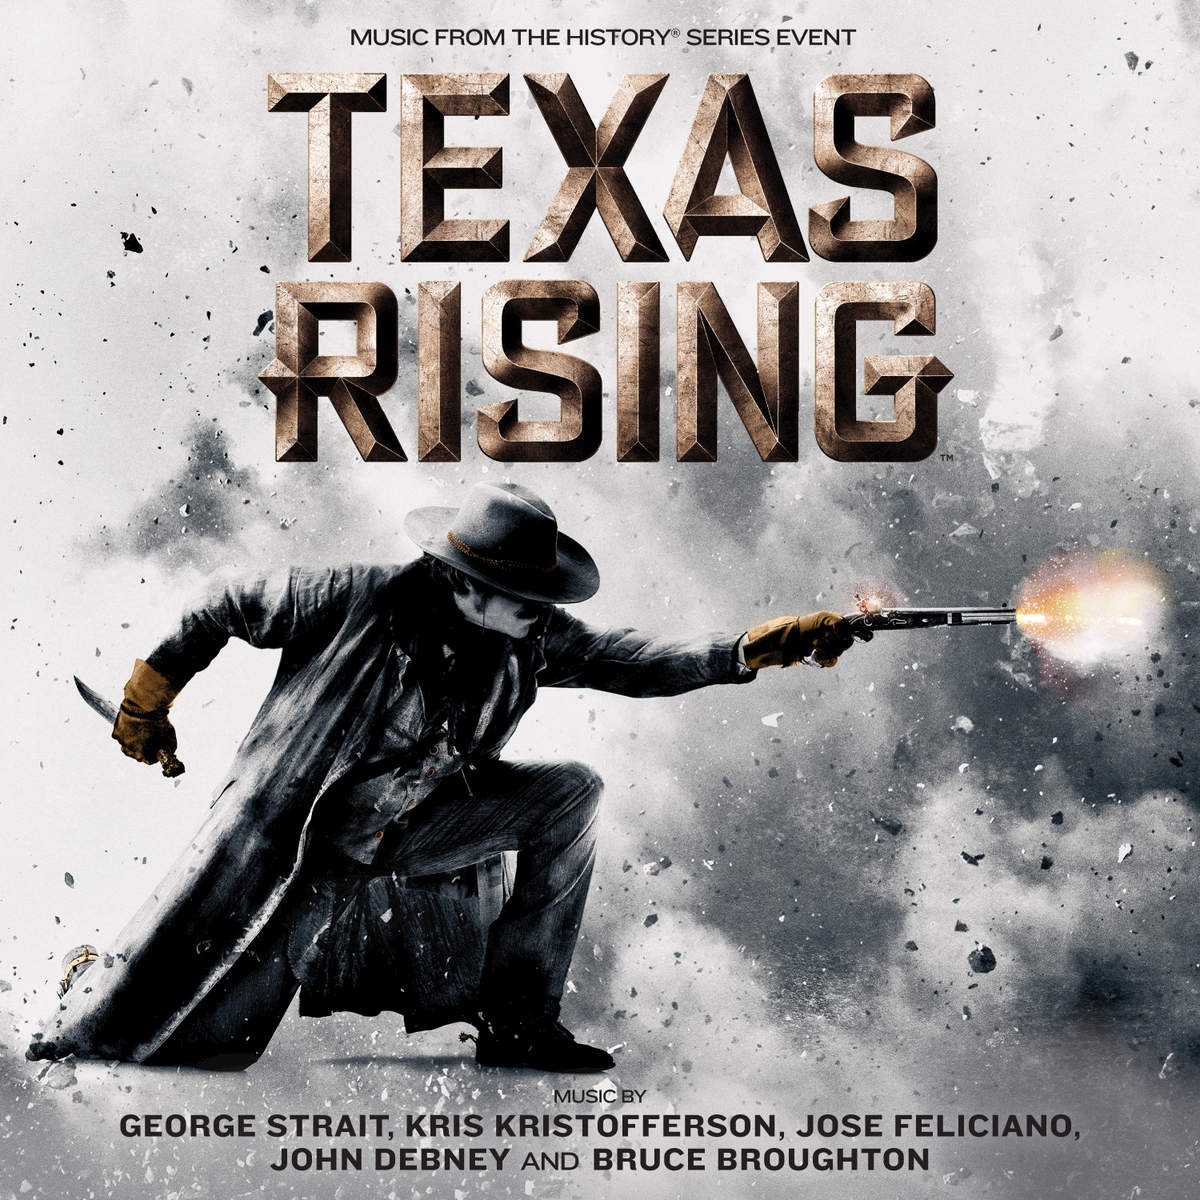 Yellow Rose Of Texas  Alternate Version From " Texas Rising" Mini Series Soundtrack